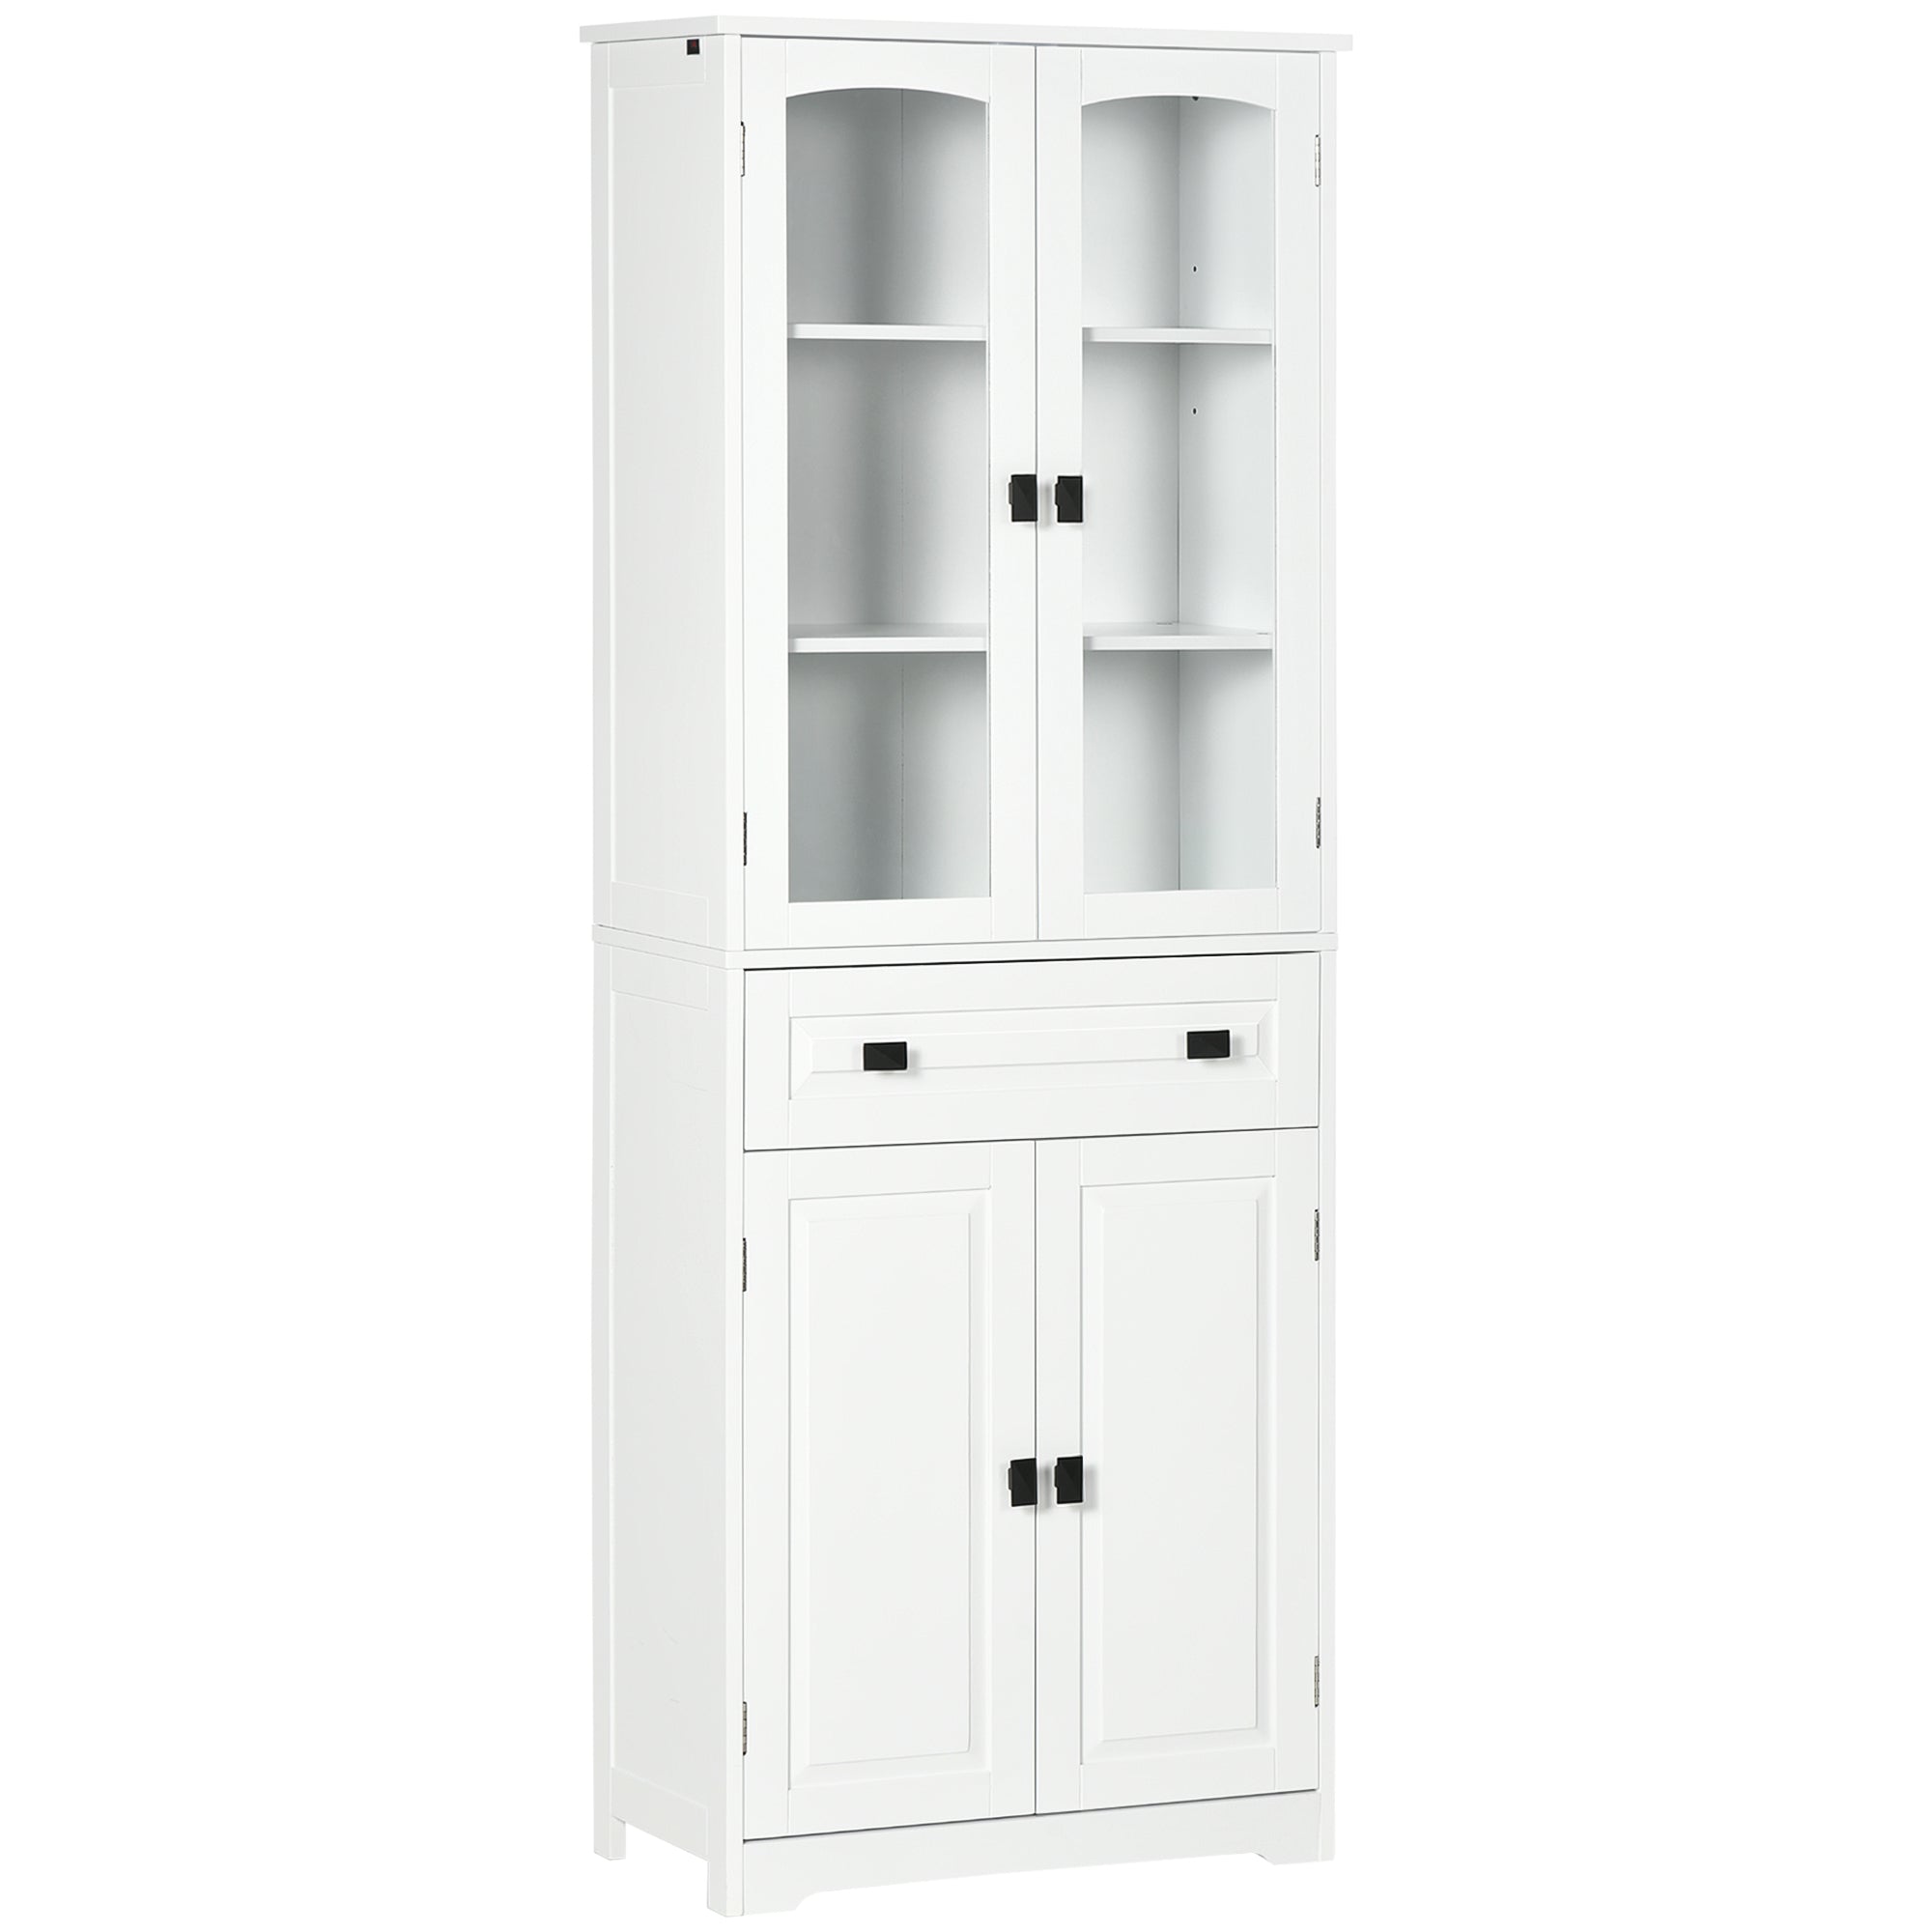 Kitchen Cupboard, Freestanding Storage Cabinet with 2 Adjustable Shelves, Drawer and Glass Door for Living Room, Dining Room, 160cm, White-0